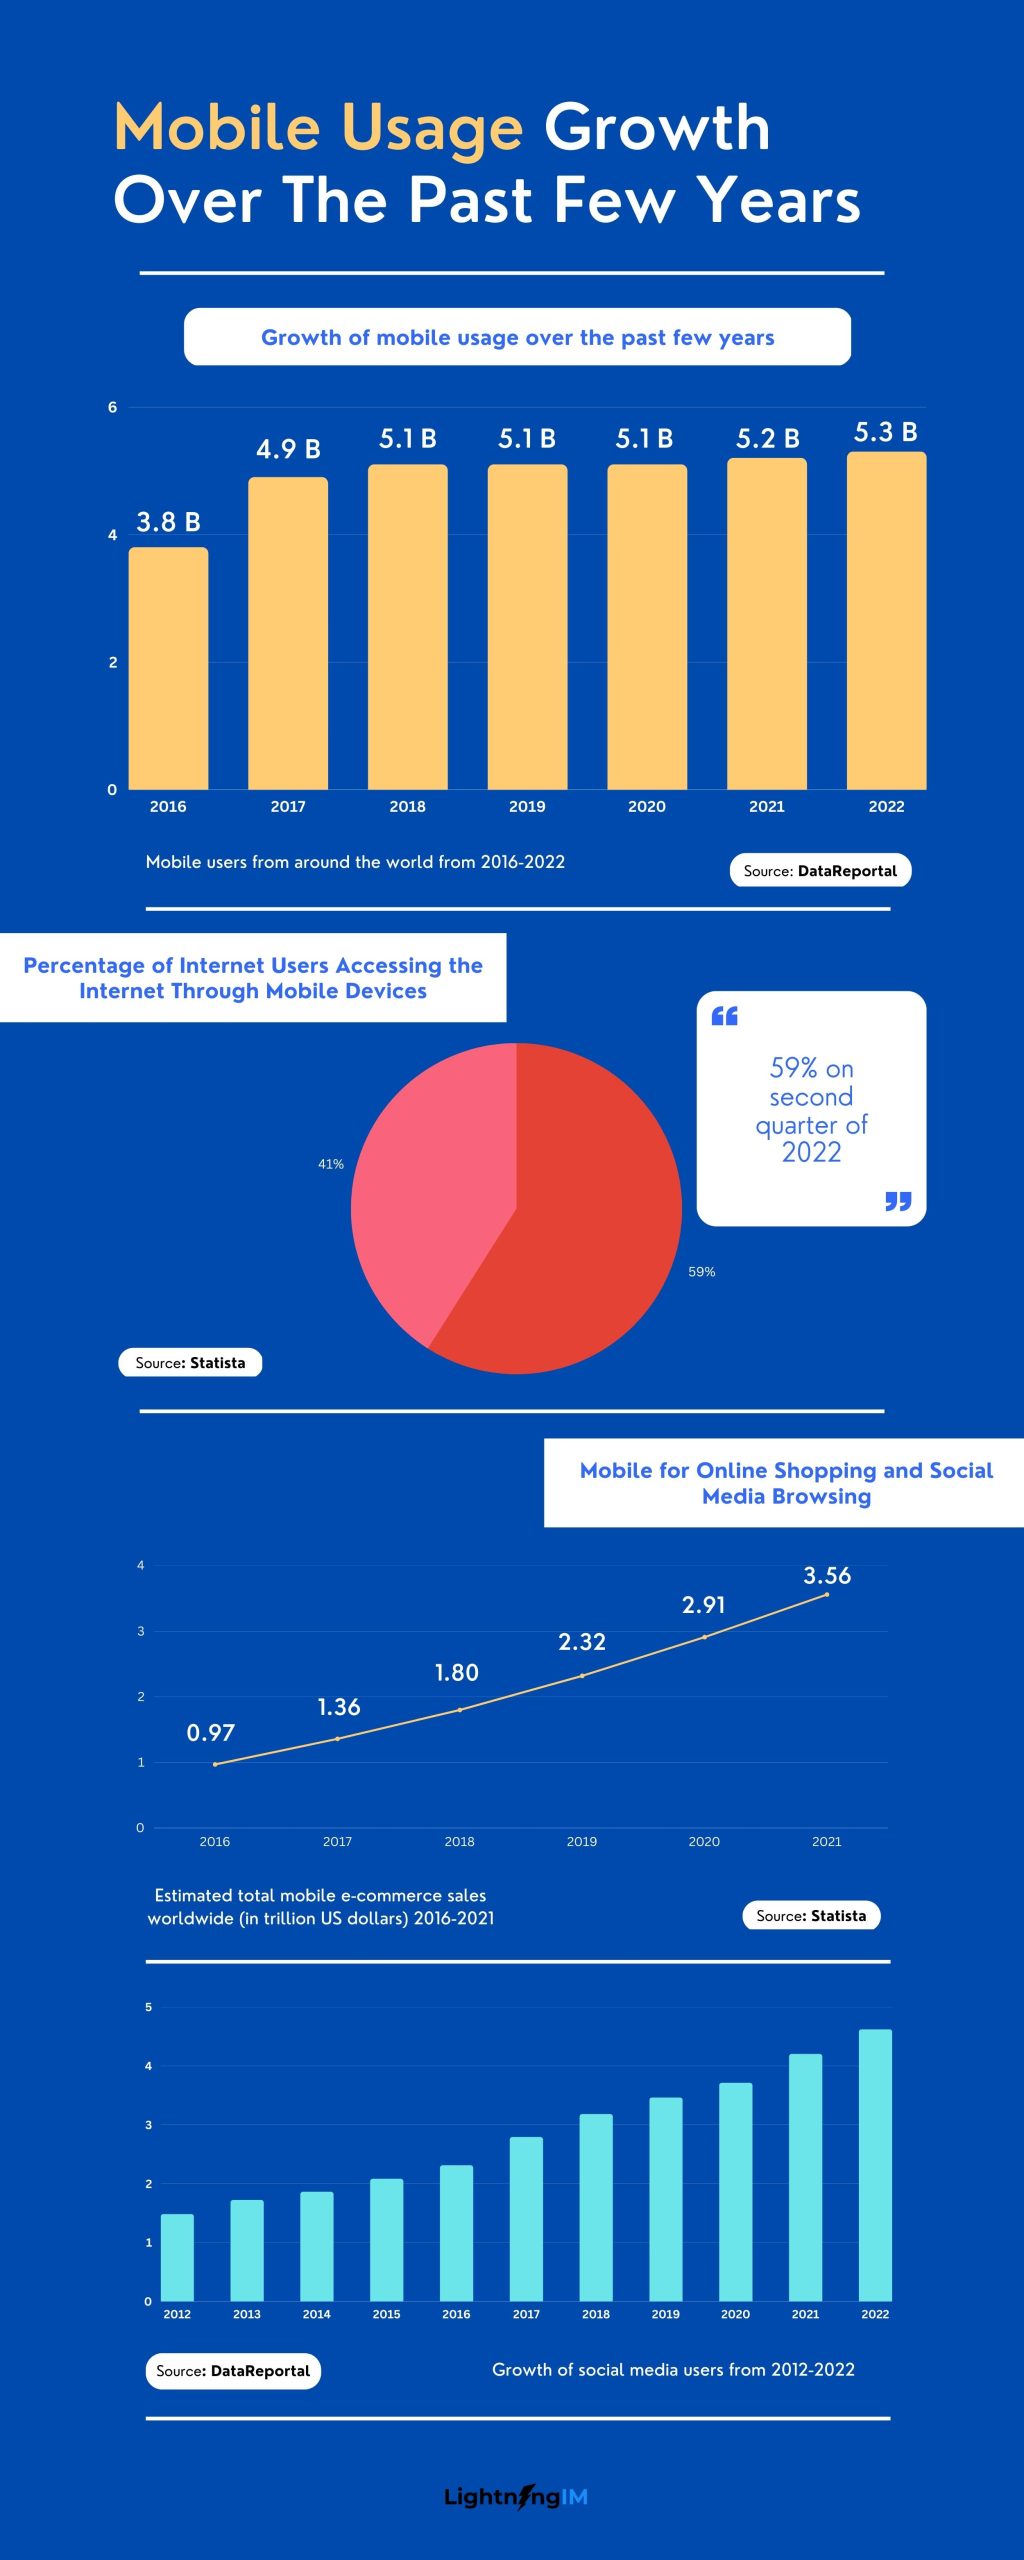 Infographic showing the statistics of mobile marketing statistics and usage over the past few years.